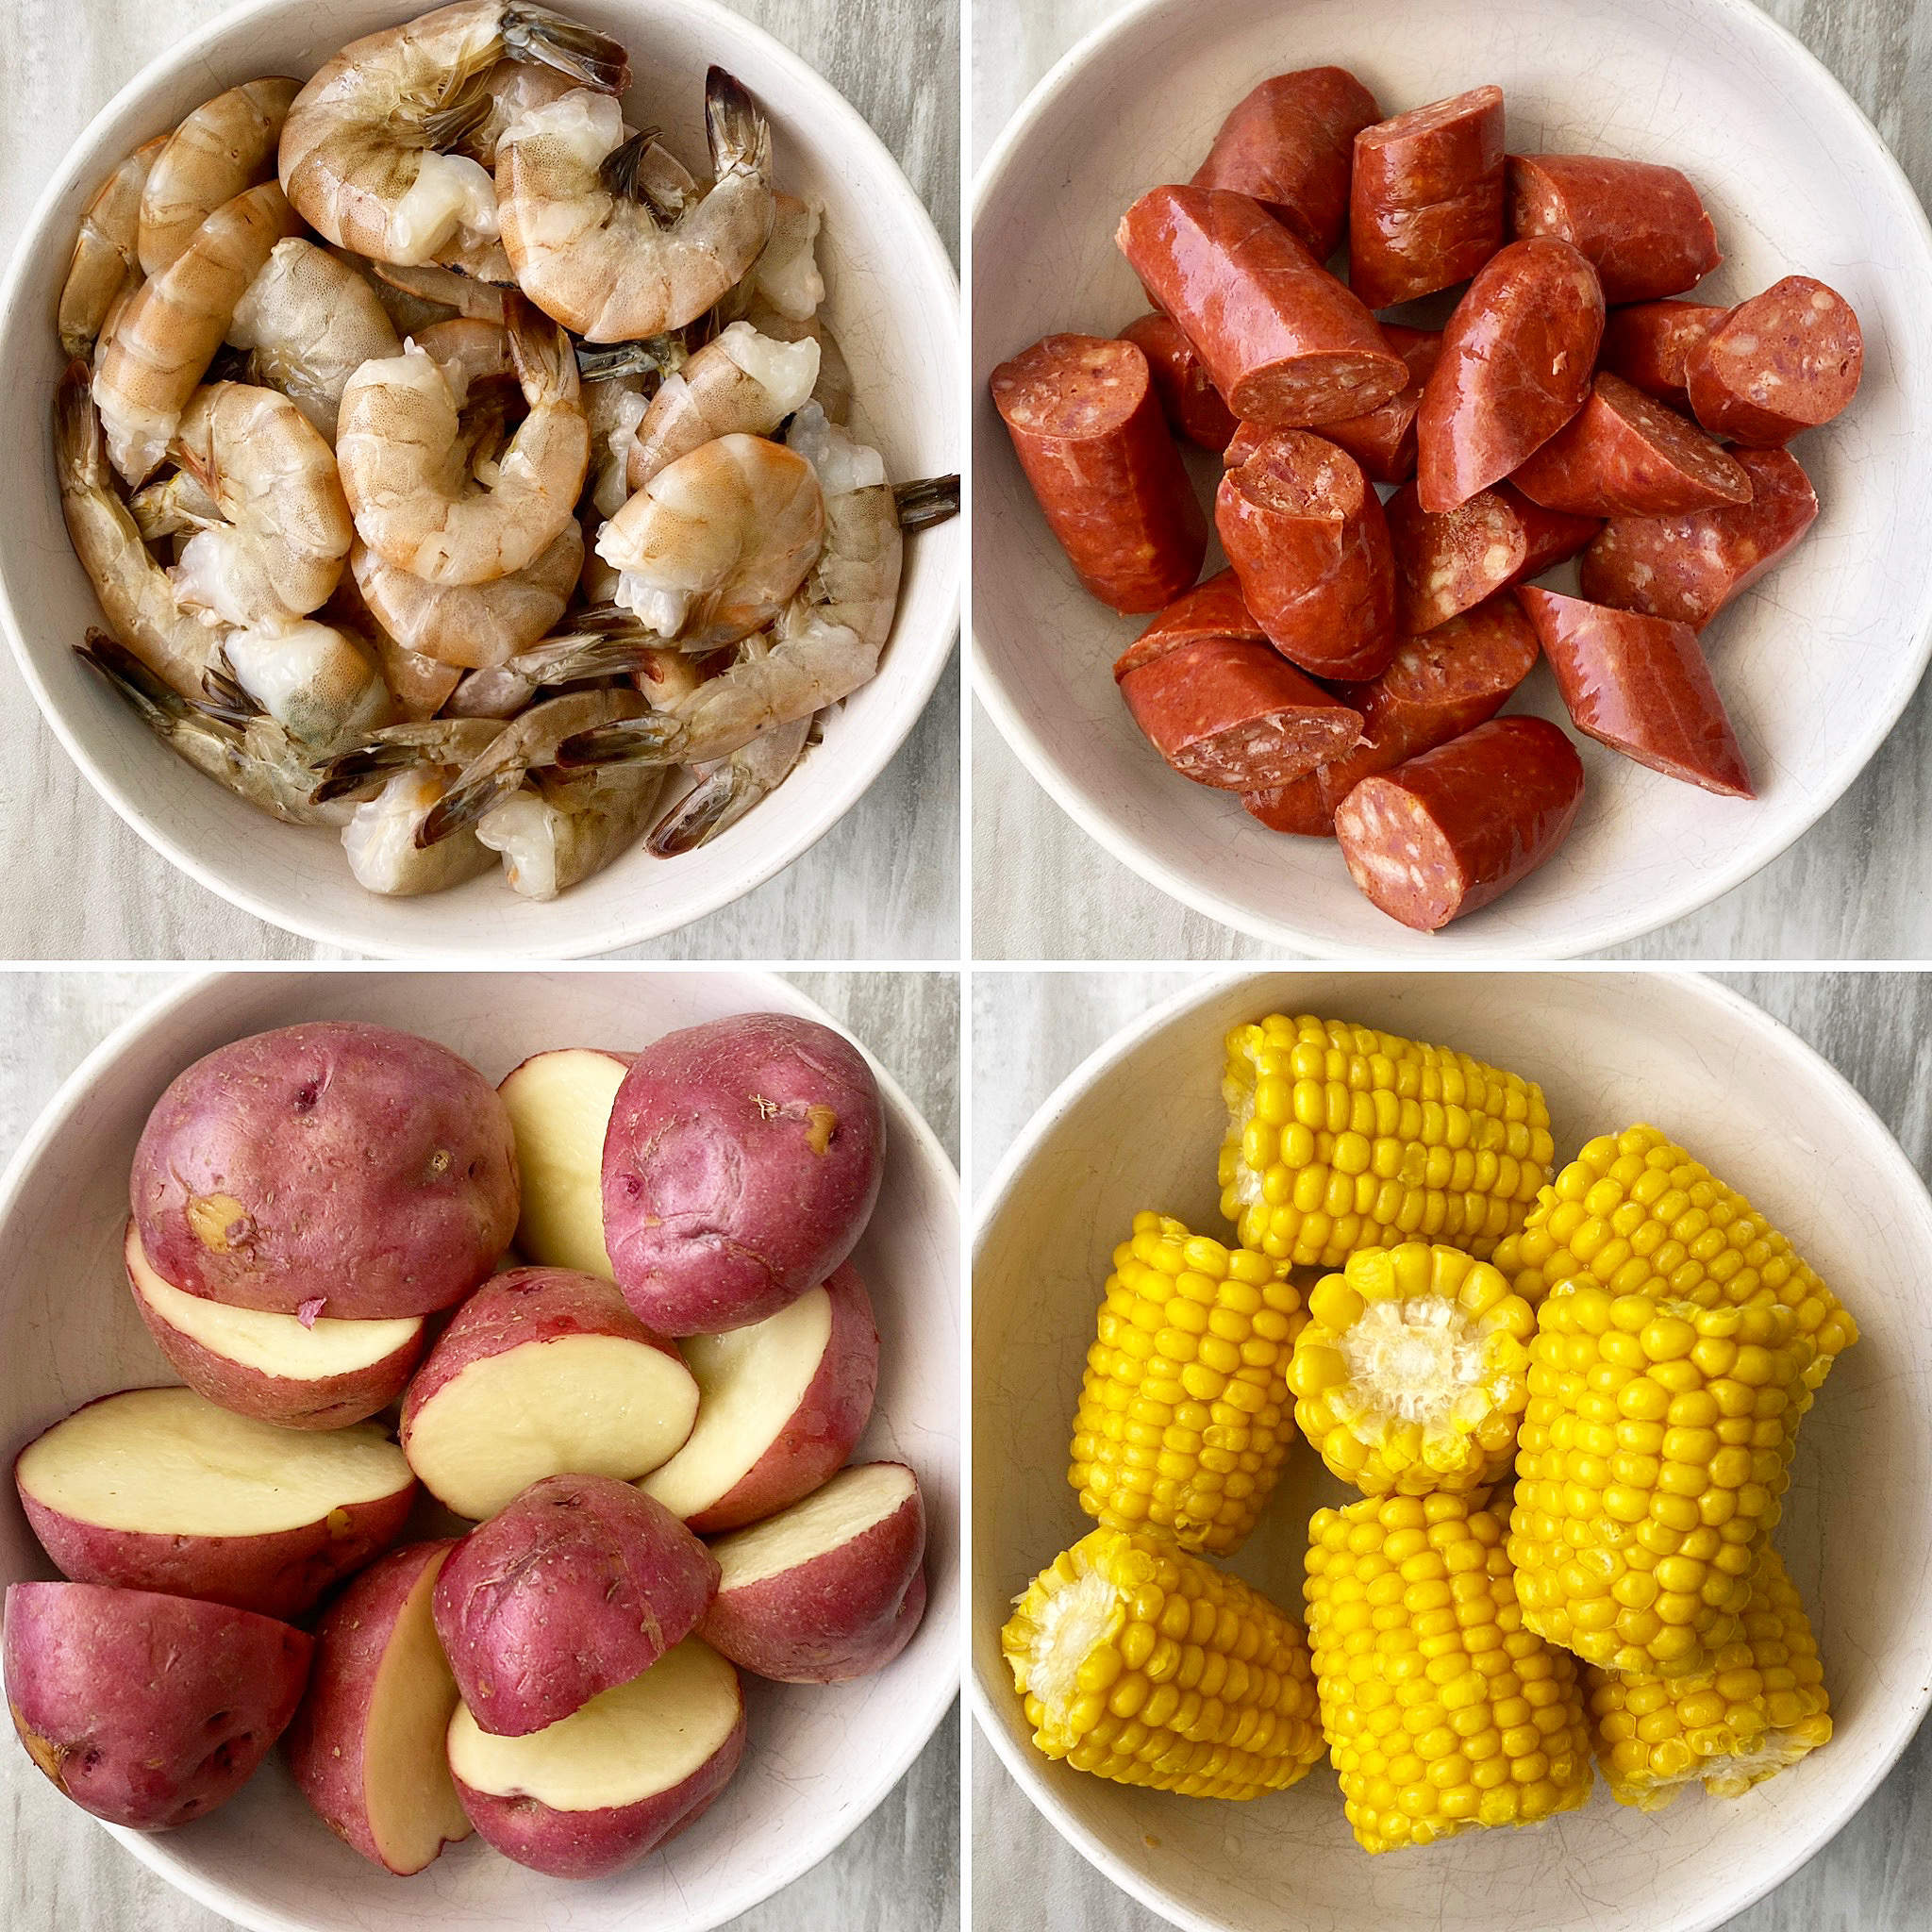 https://fitslowcookerqueen.com/wp-content/uploads/2019/08/low-country-boil-1.jpg